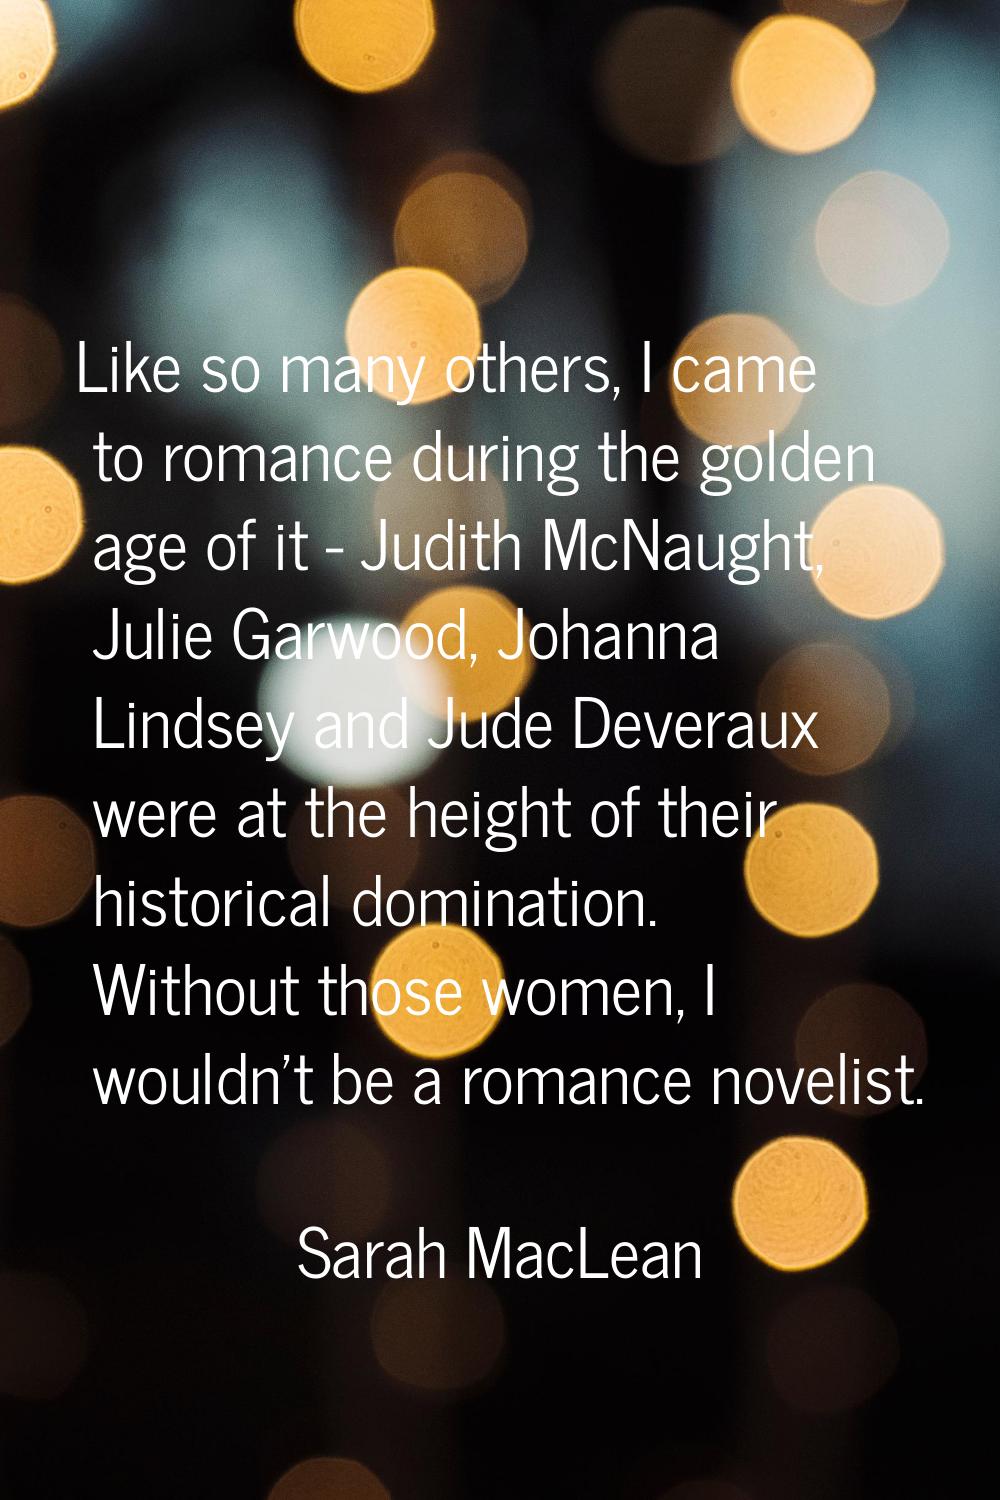 Like so many others, I came to romance during the golden age of it - Judith McNaught, Julie Garwood